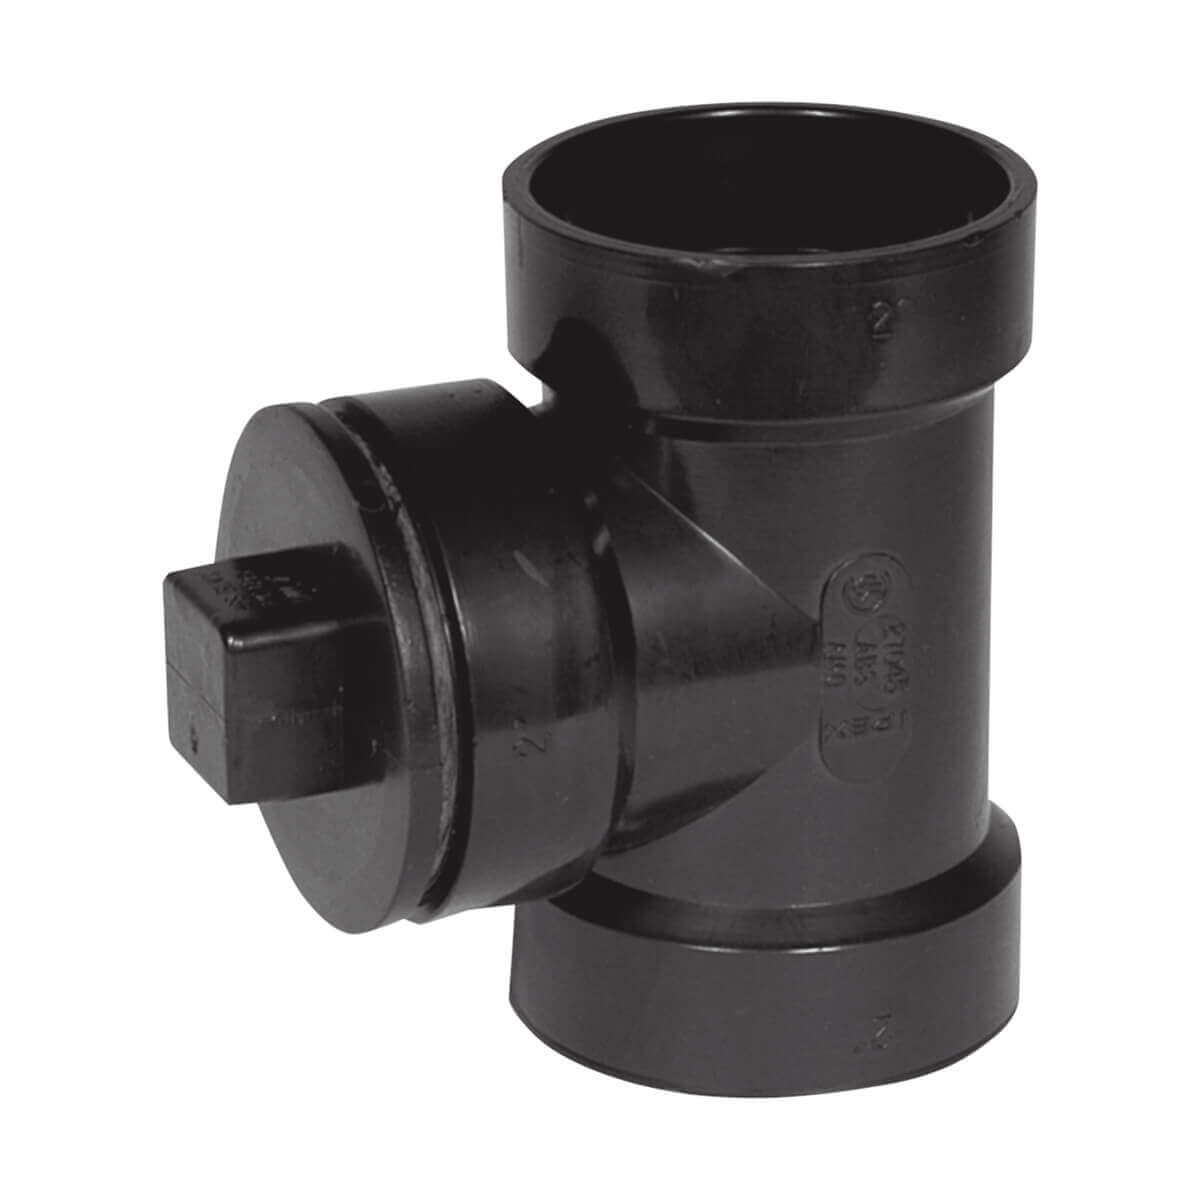 ABS-DWV Cleanout Tee - with plug - Hub - 1-1/2-in